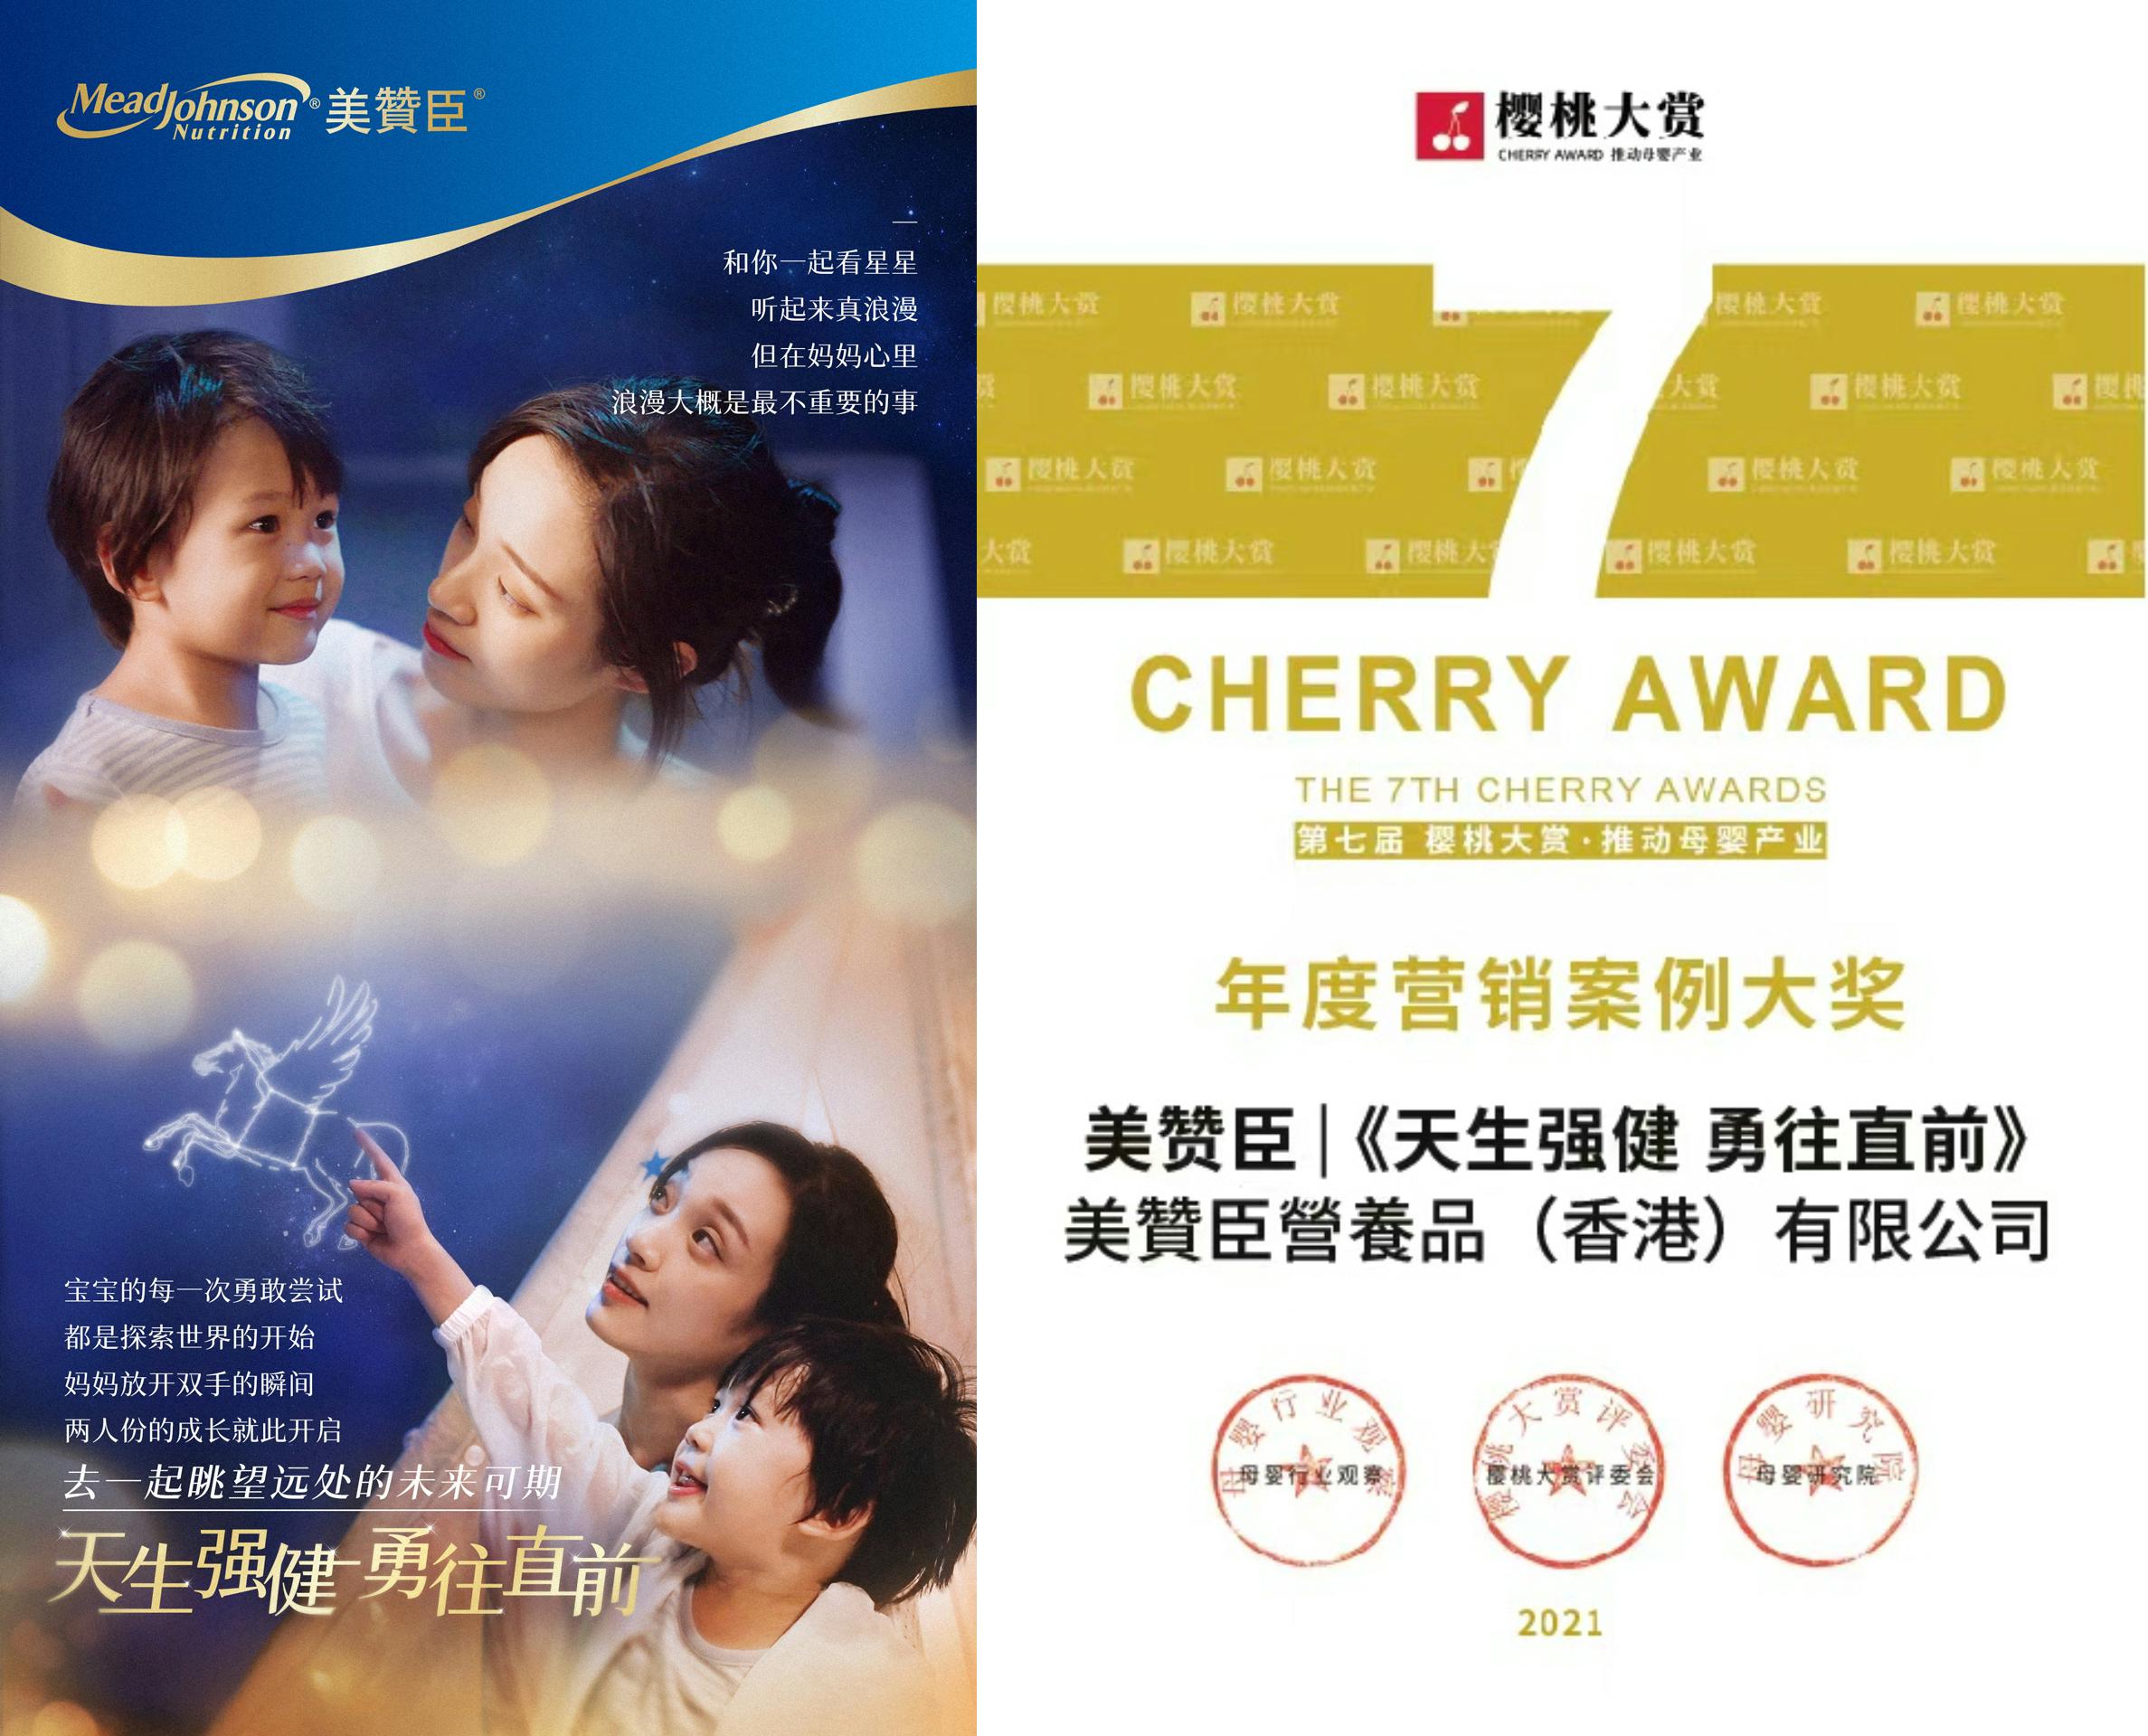 Mead Johnson Nutrition Hong Kong’s cross-border marketing campaign “Born to be strong and healthy, Move forward bravely” (left of photo) was awarded “2021 Excellent Marketing Campaign Award” at the 7th Cherry Awards (right of photo).